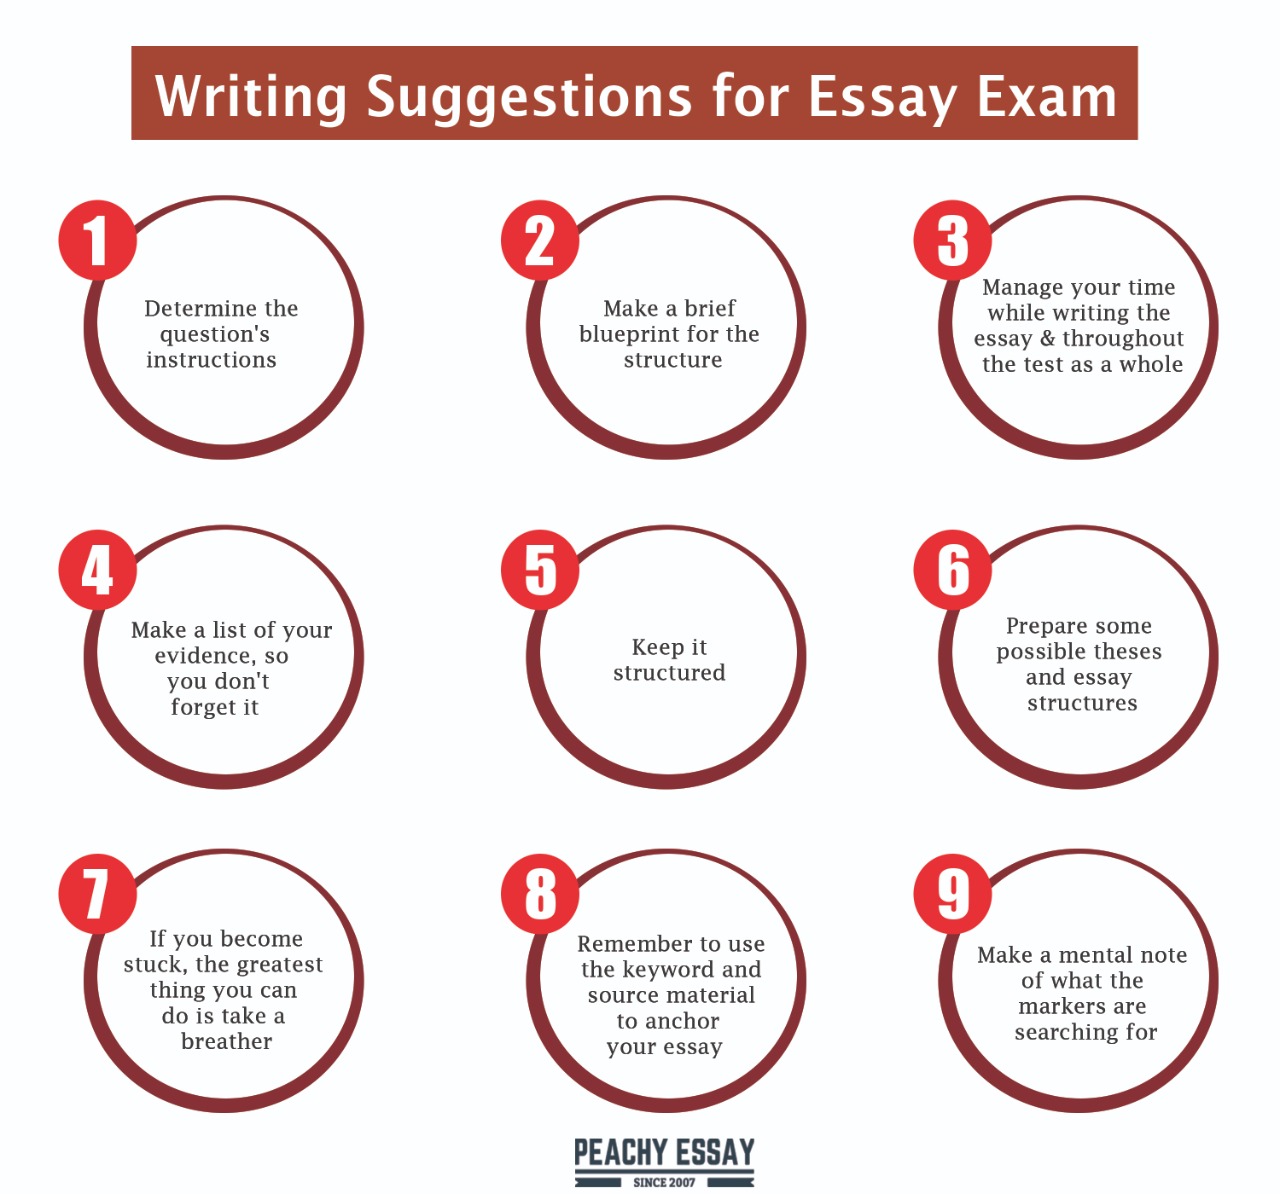 tips on how to write a good essay in an exam